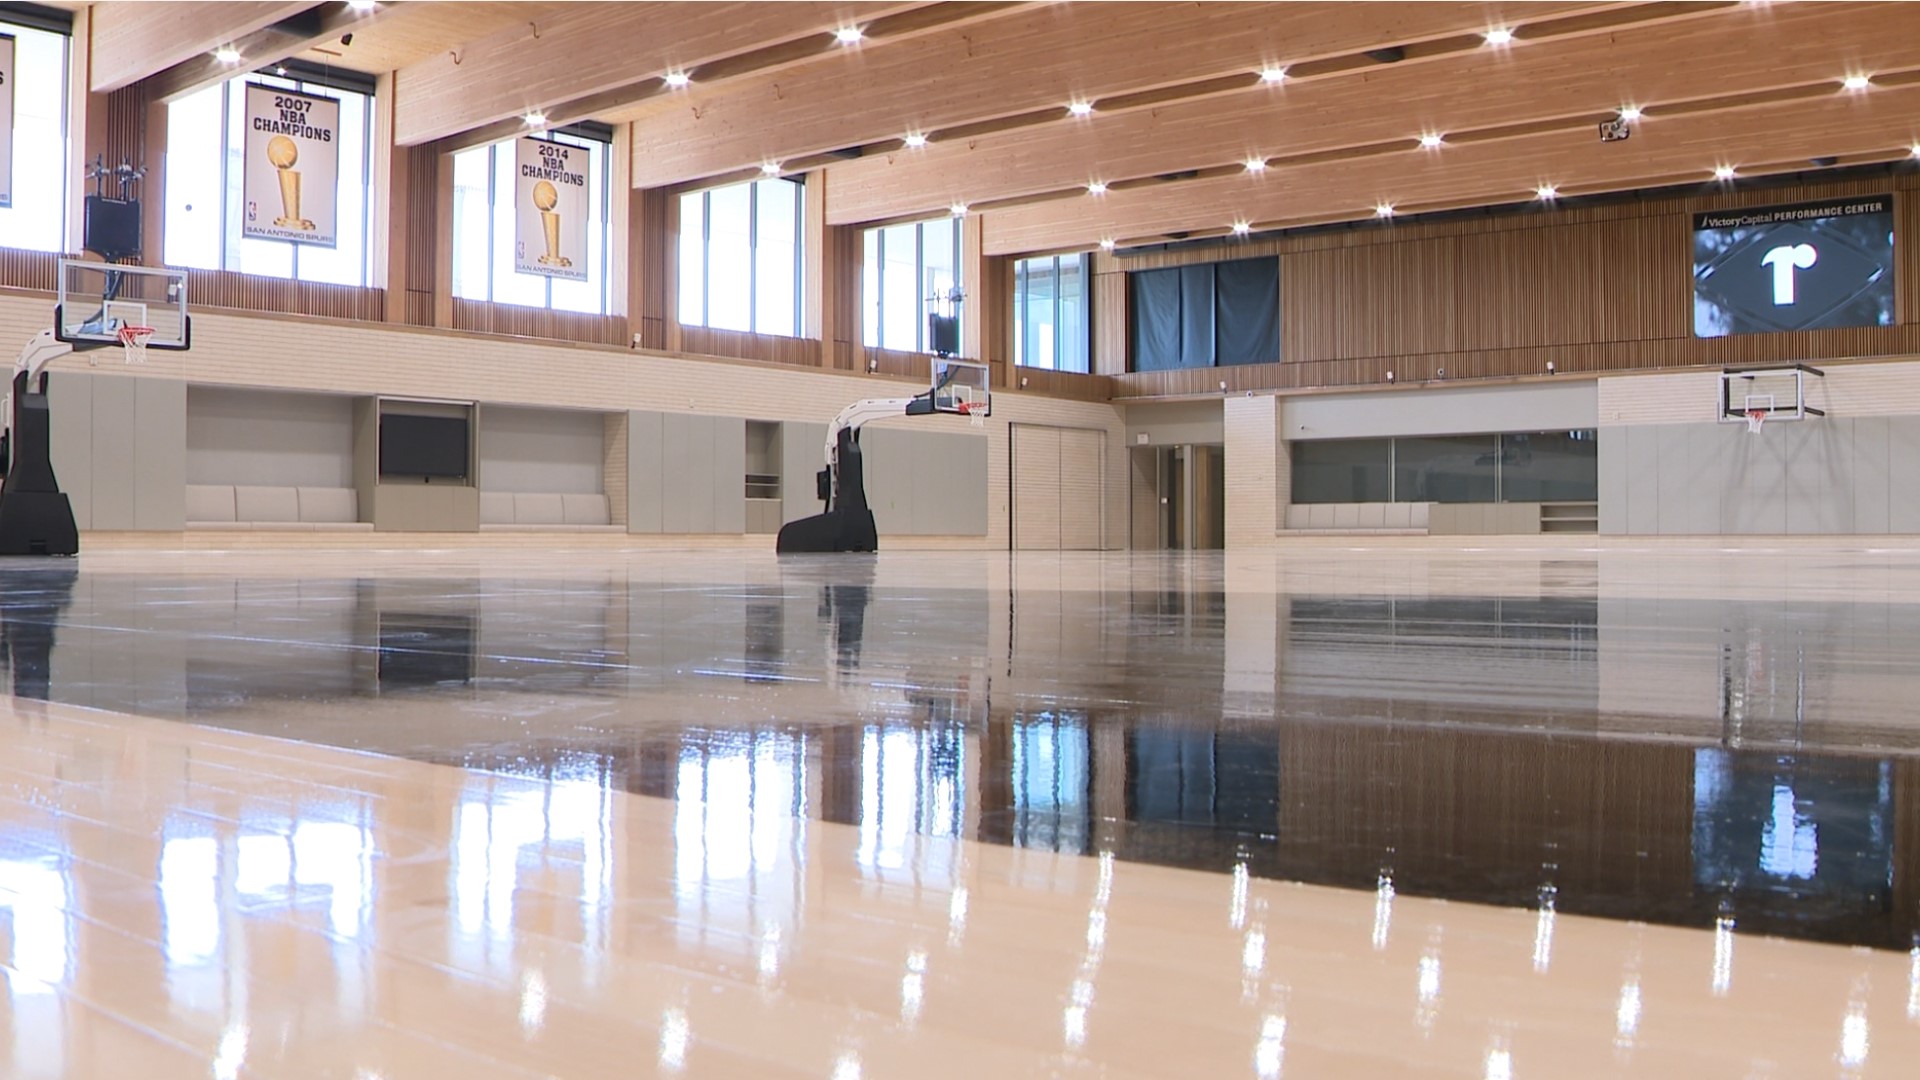 Look inside Spurs new practice facility at The Rock at La Cantera